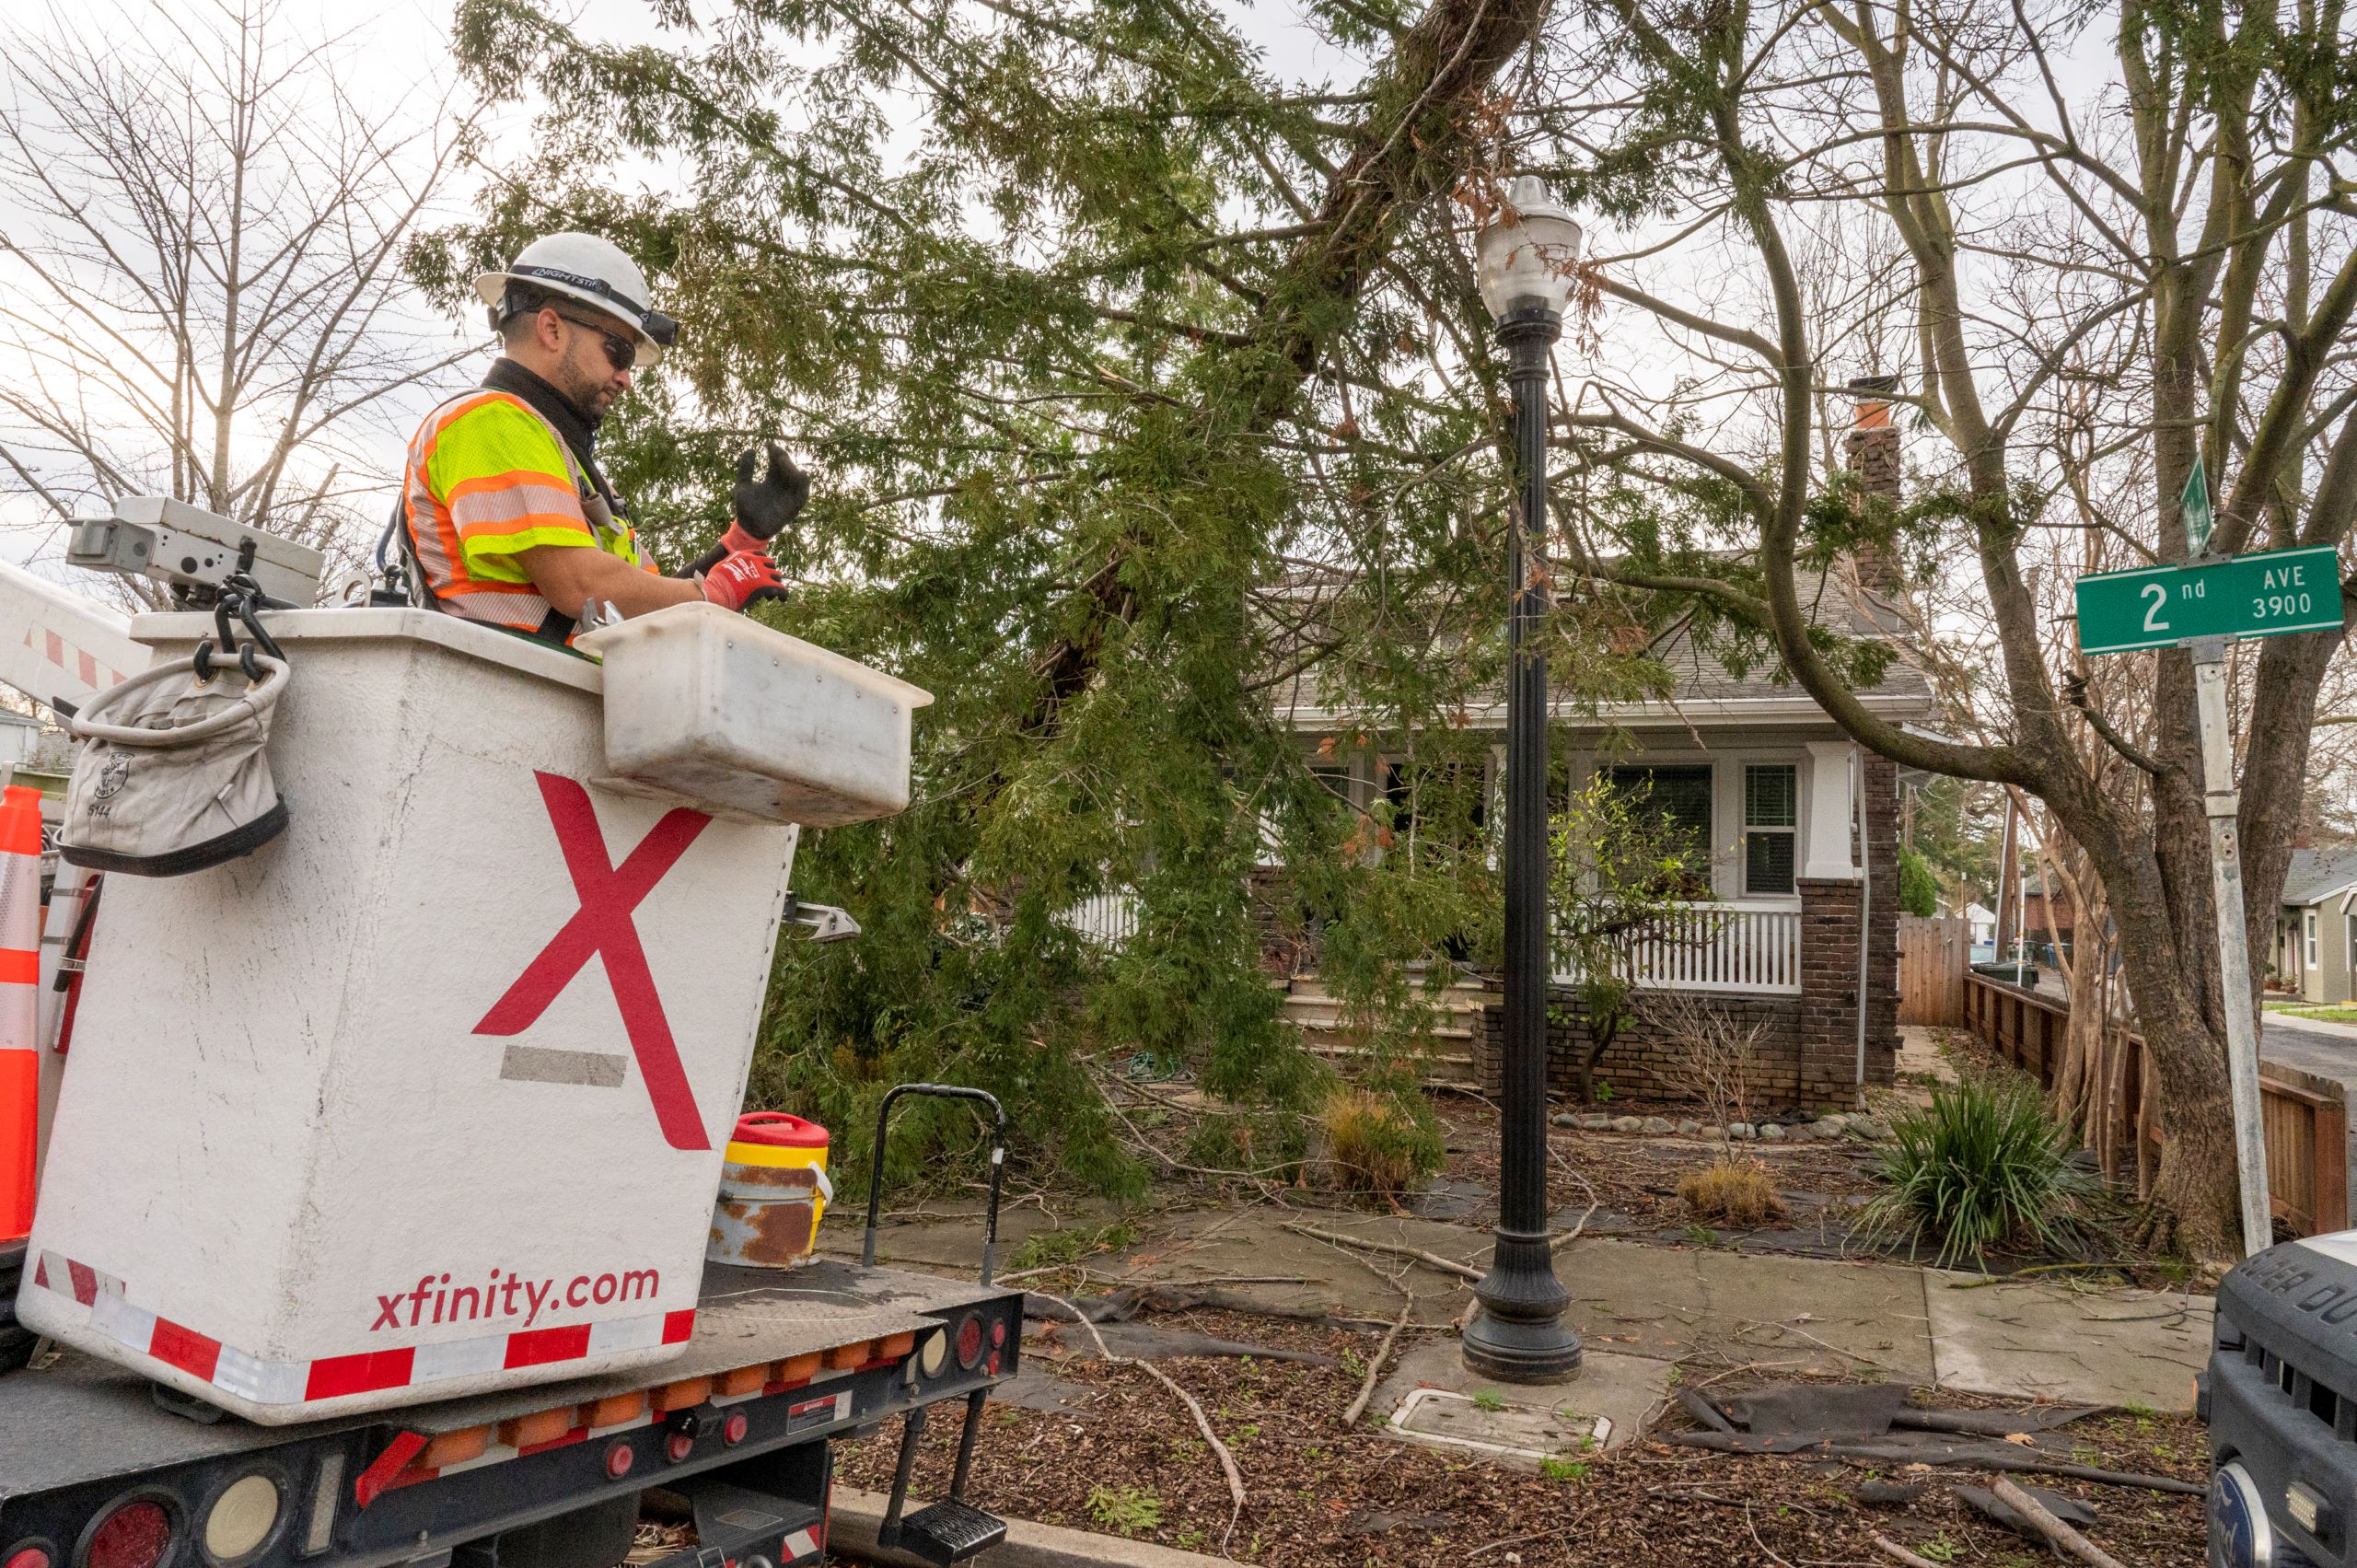 Comcast Crews Continue to Work Tirelessly to Identify Damaged Equipment & Restore Services Following Atmospheric Rainstorms